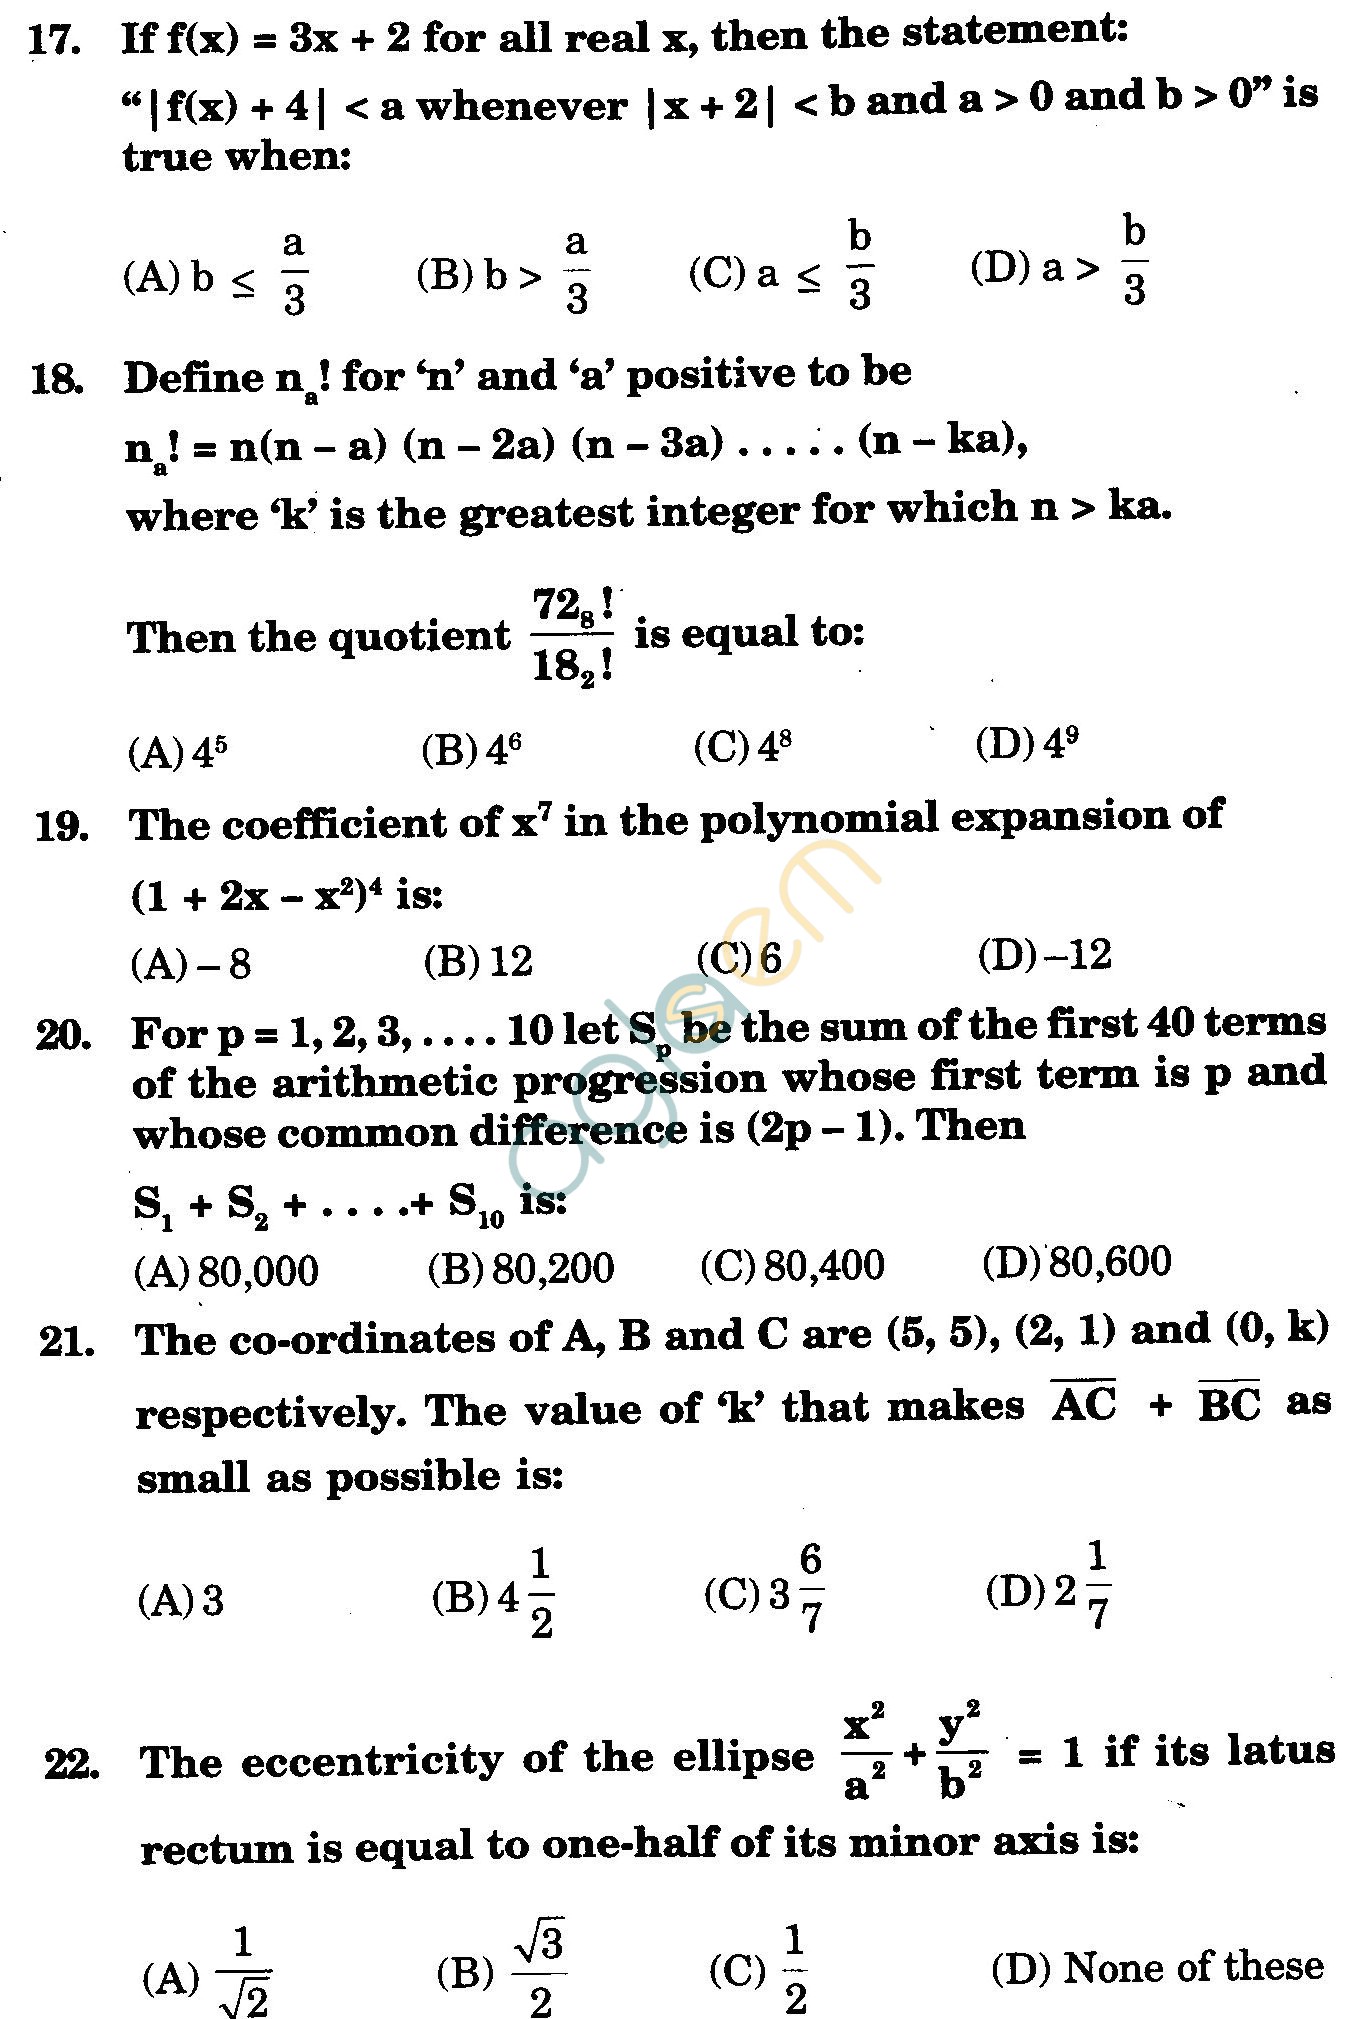 NSTSE 2010 Class XI PCM Question Paper with Answers - Mathematics